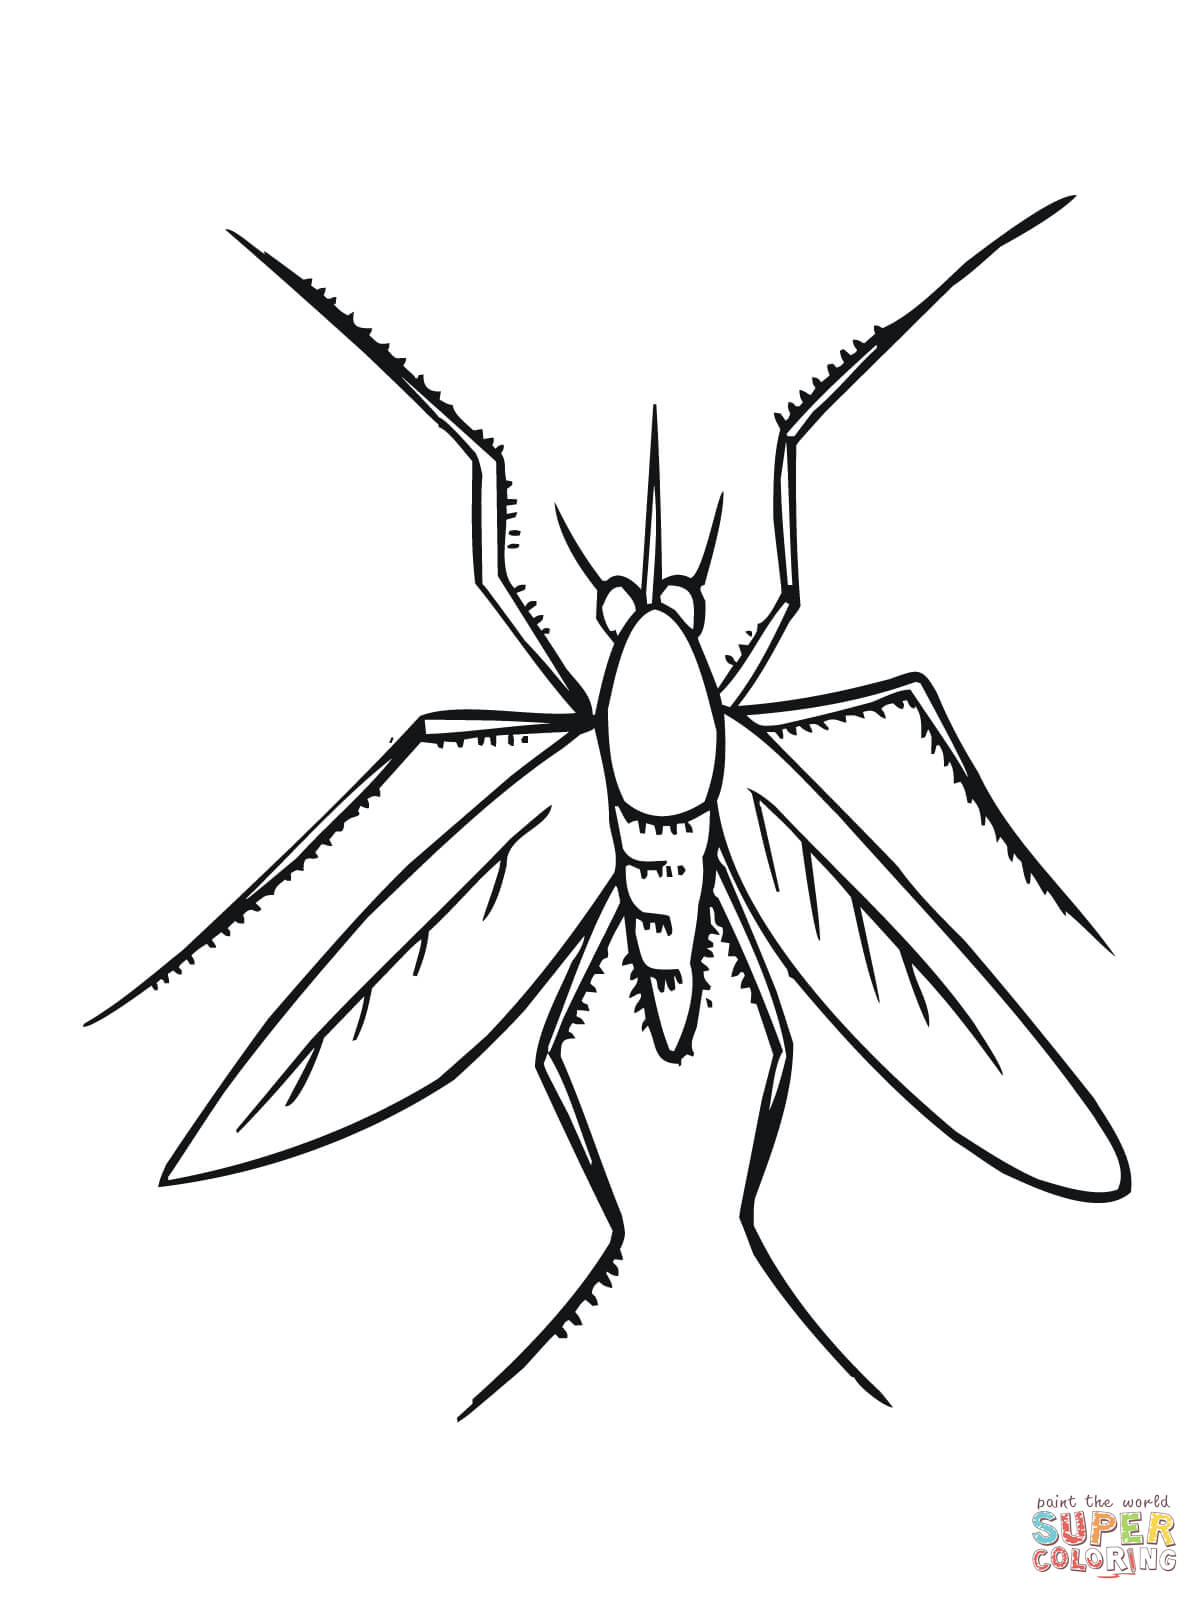 Mosquito coloring #4, Download drawings